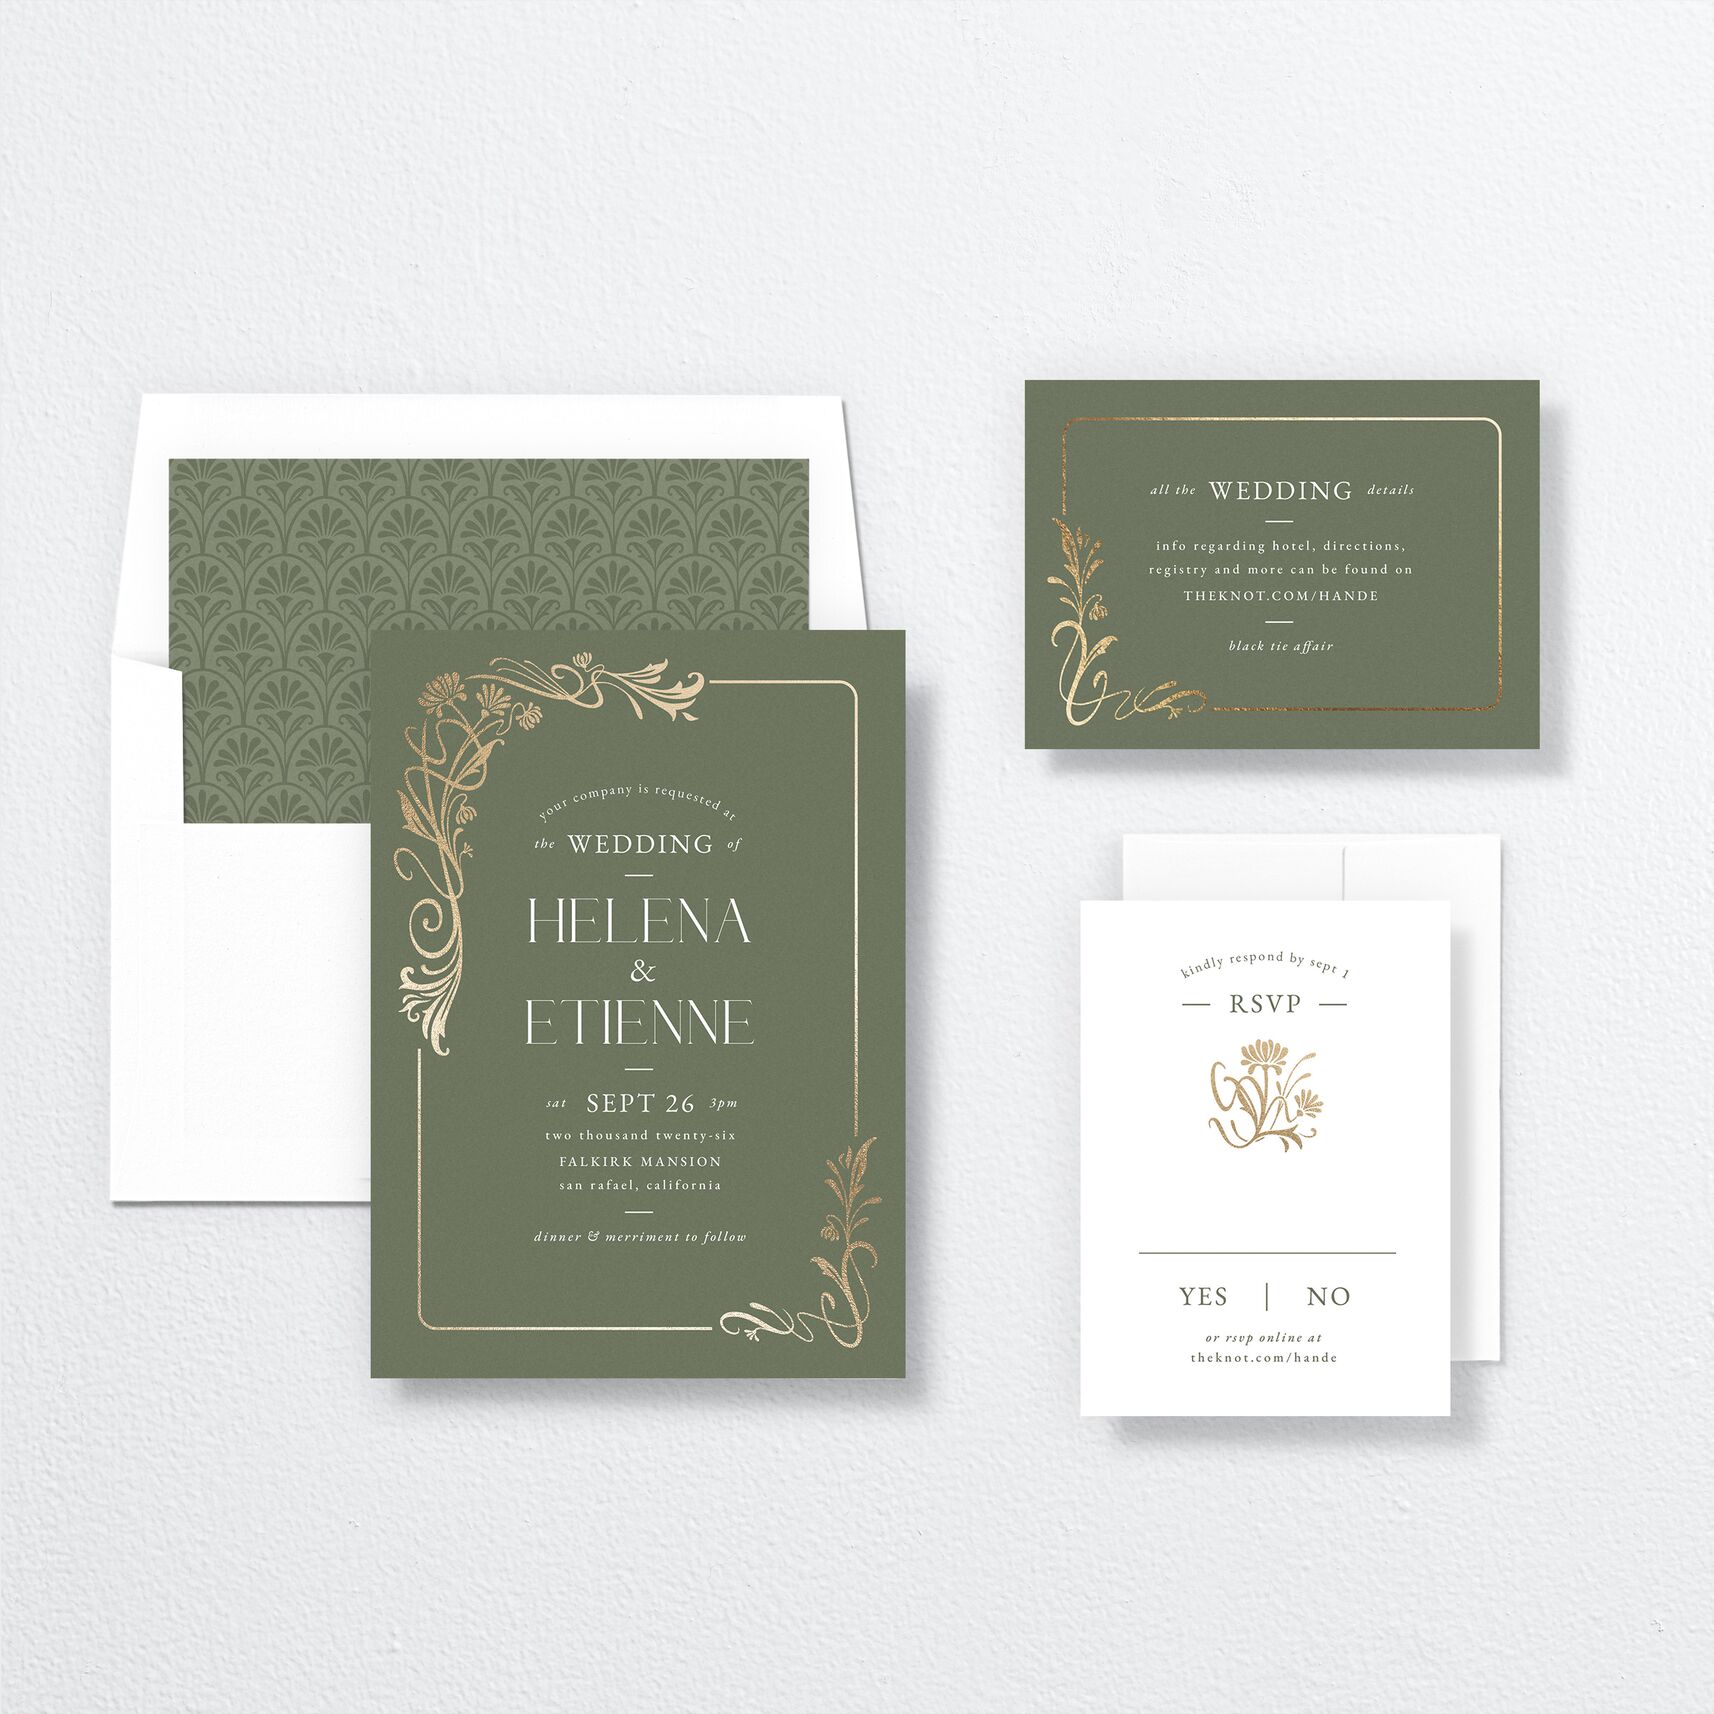 Nouveau Frame Wedding Invitations suite in green